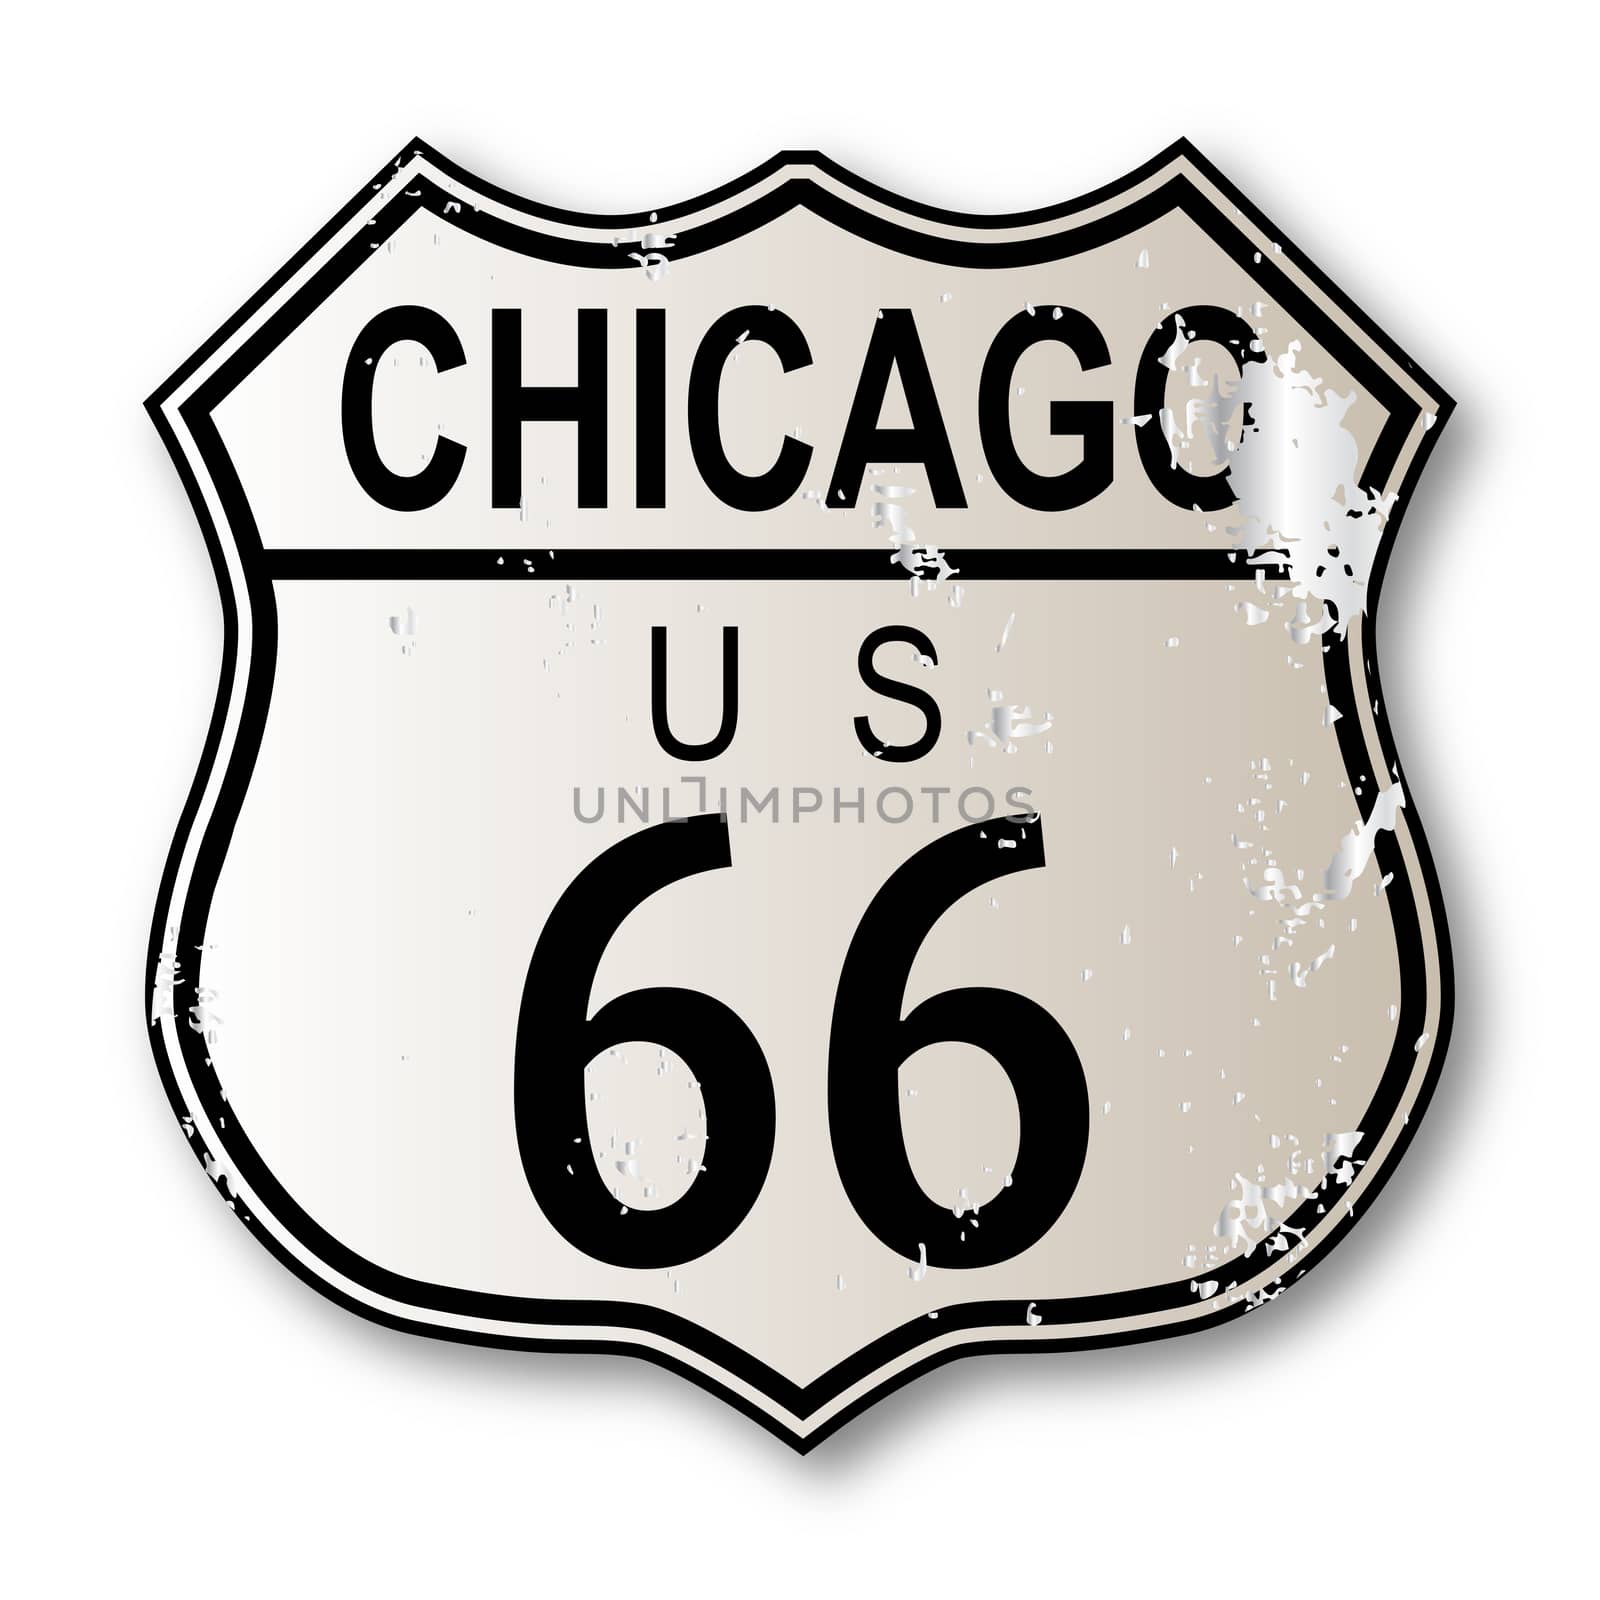 Chicago Route 66 traffic sign over a white background and the legend ROUTE US 66